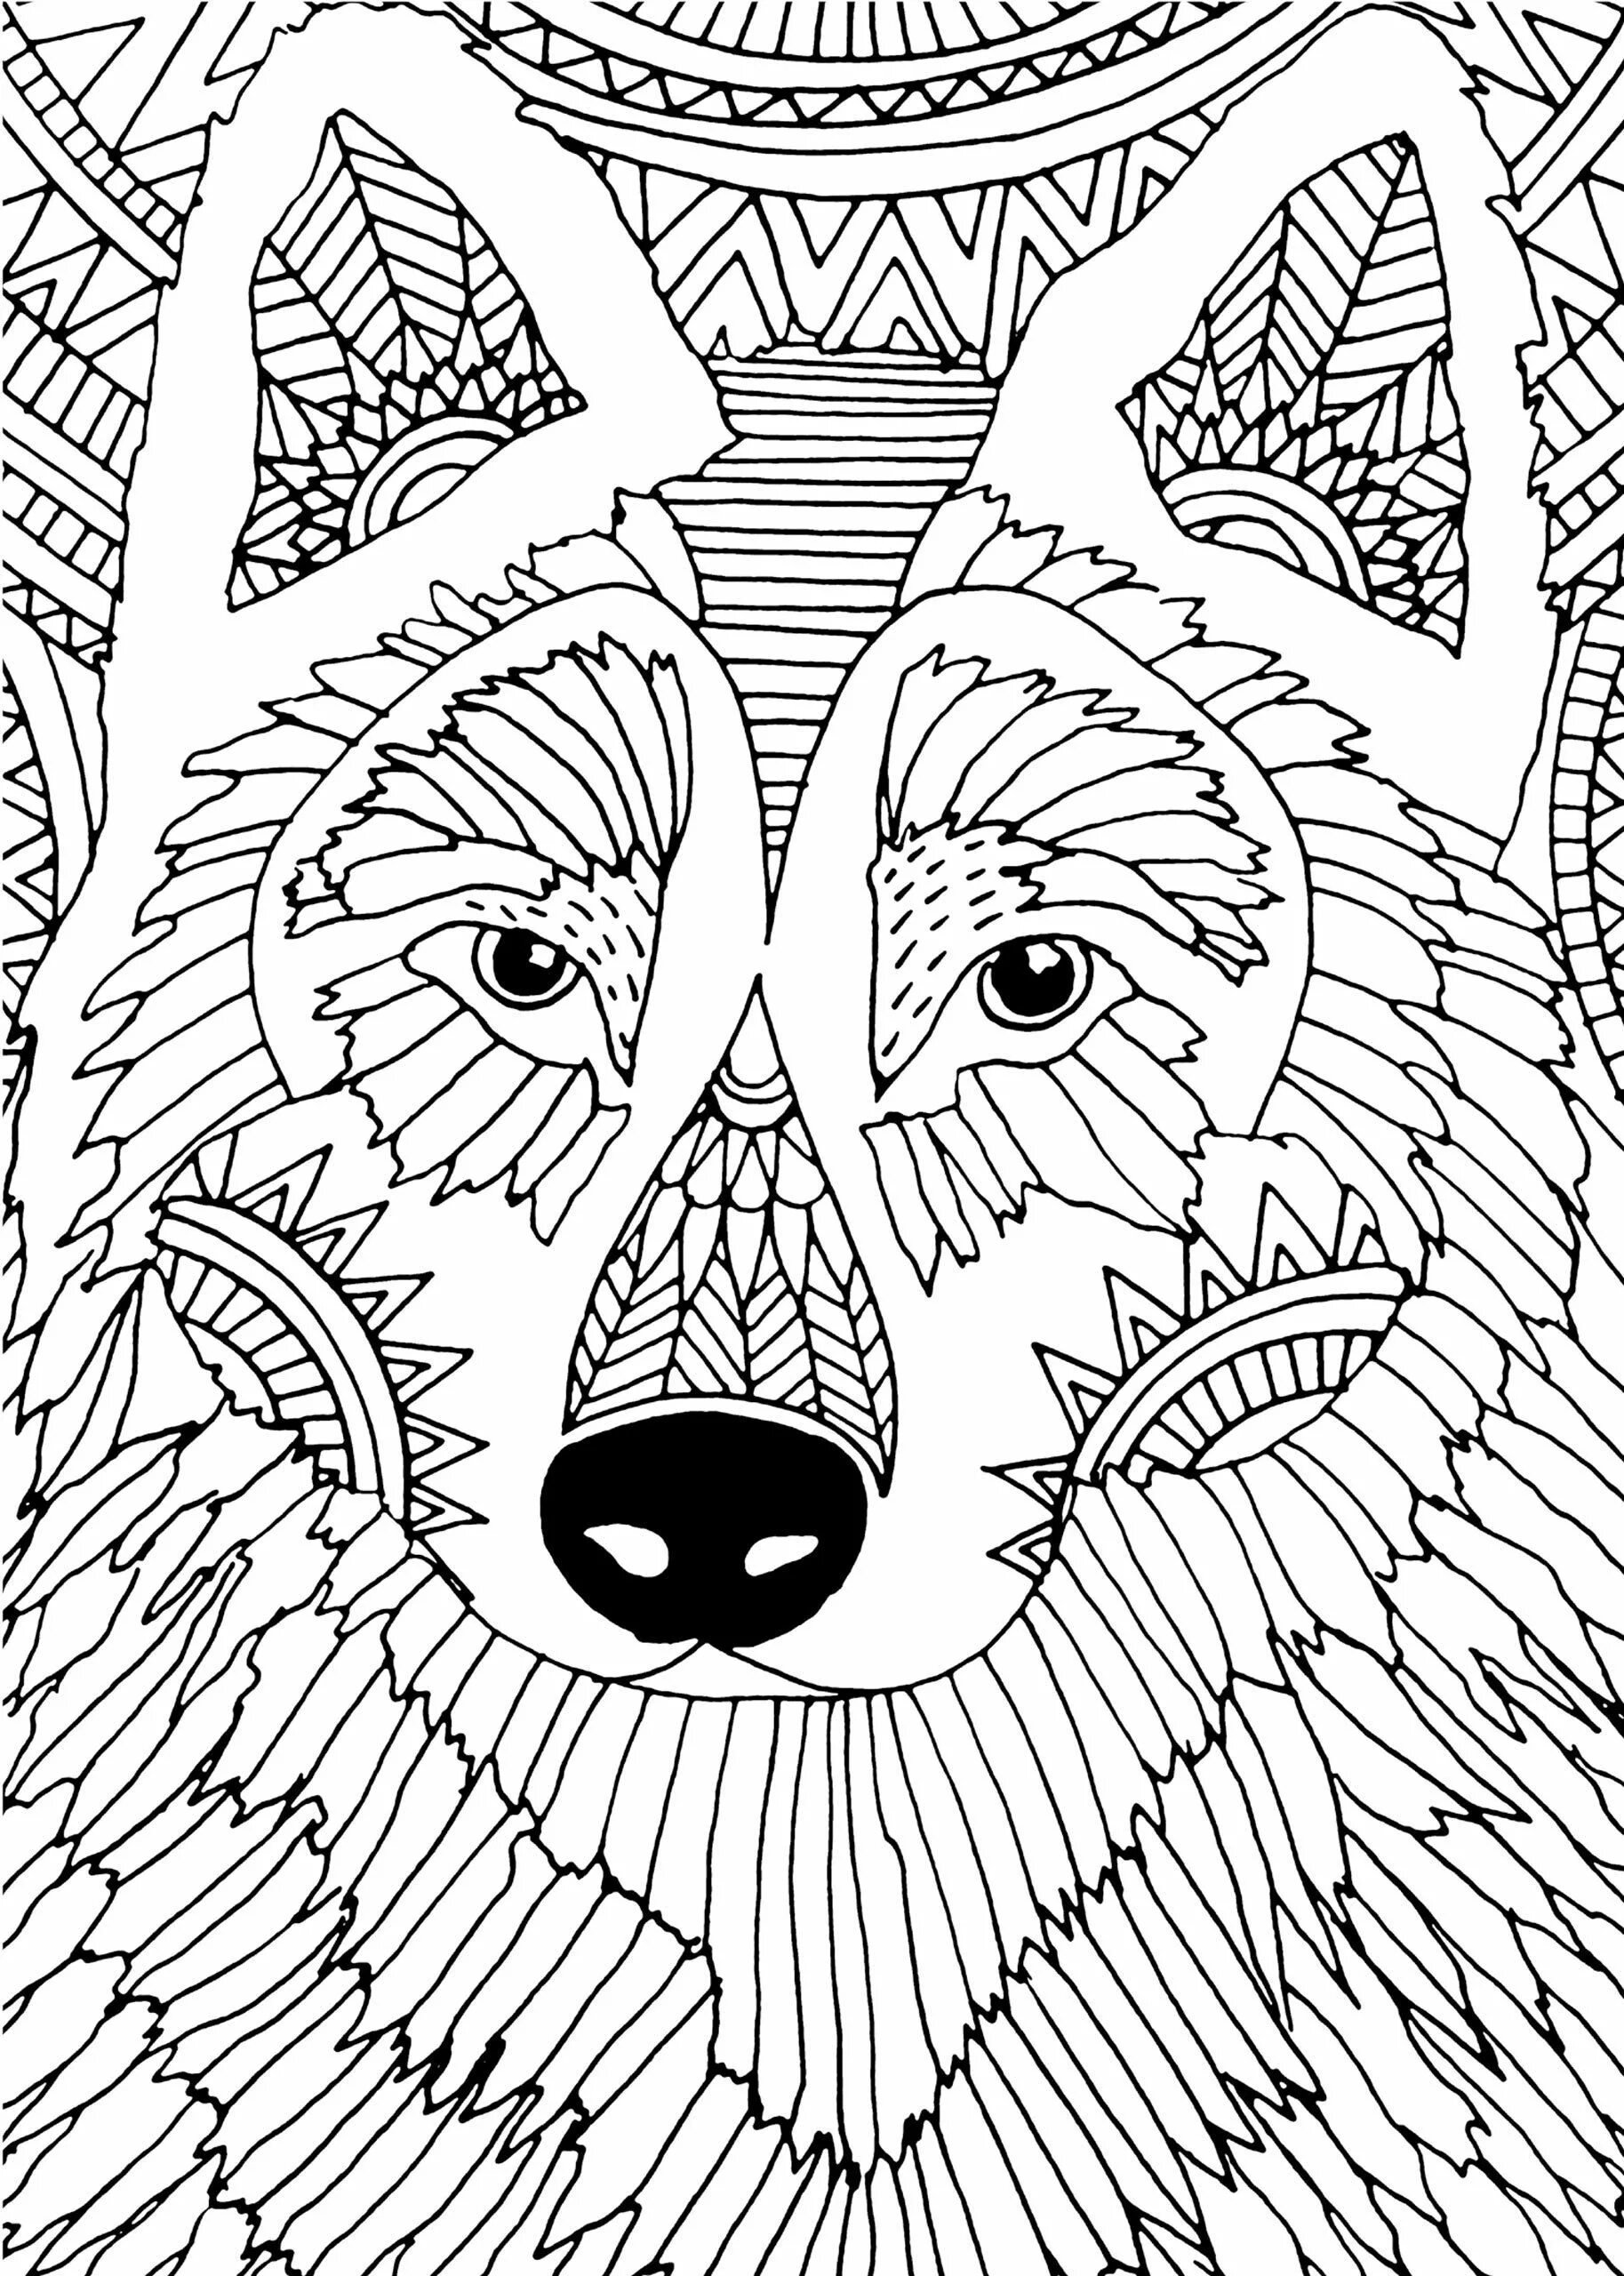 Inspirational coloring book for kids